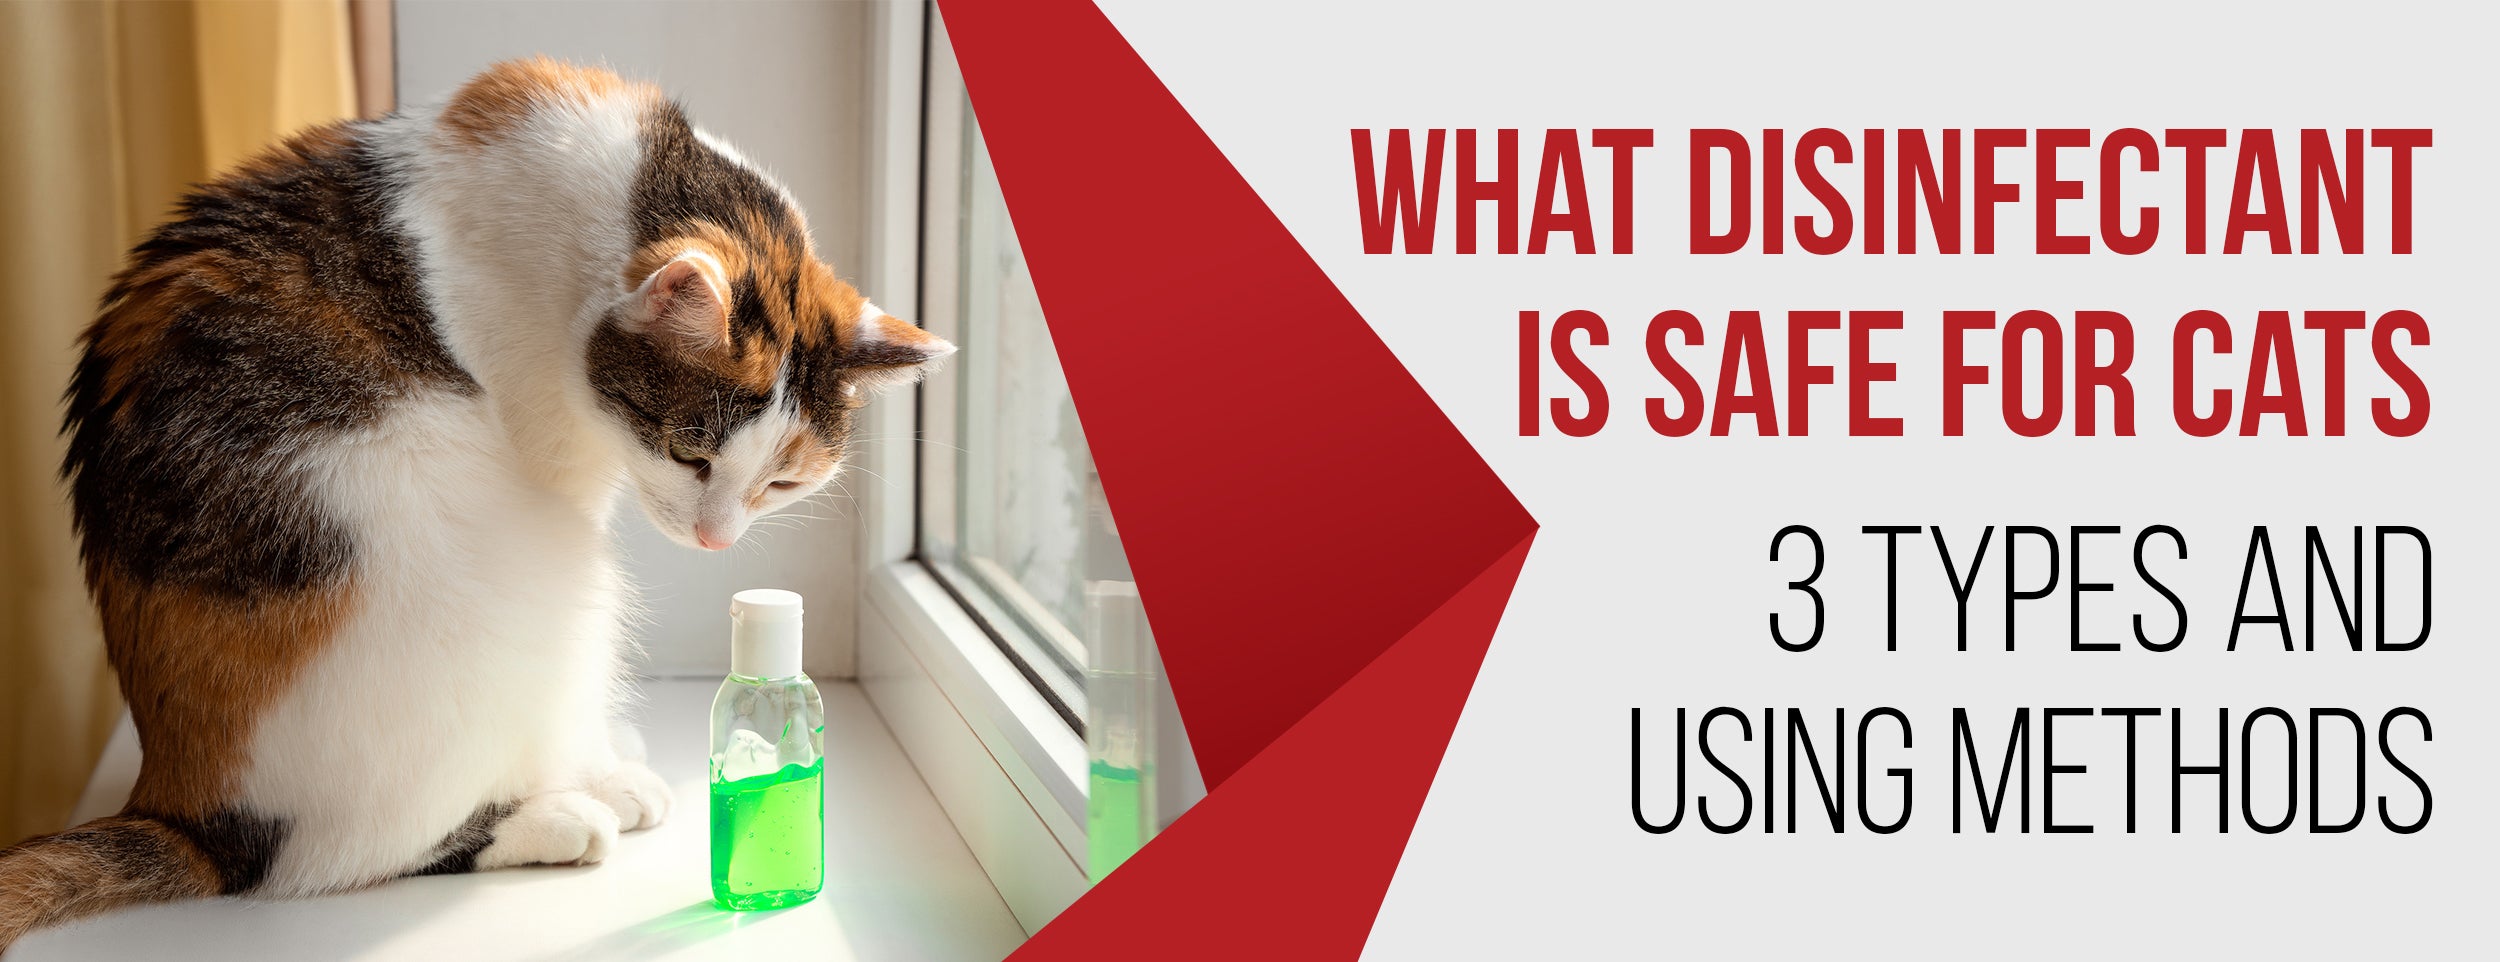 3 types of disinfectants safe for cats & how to use them